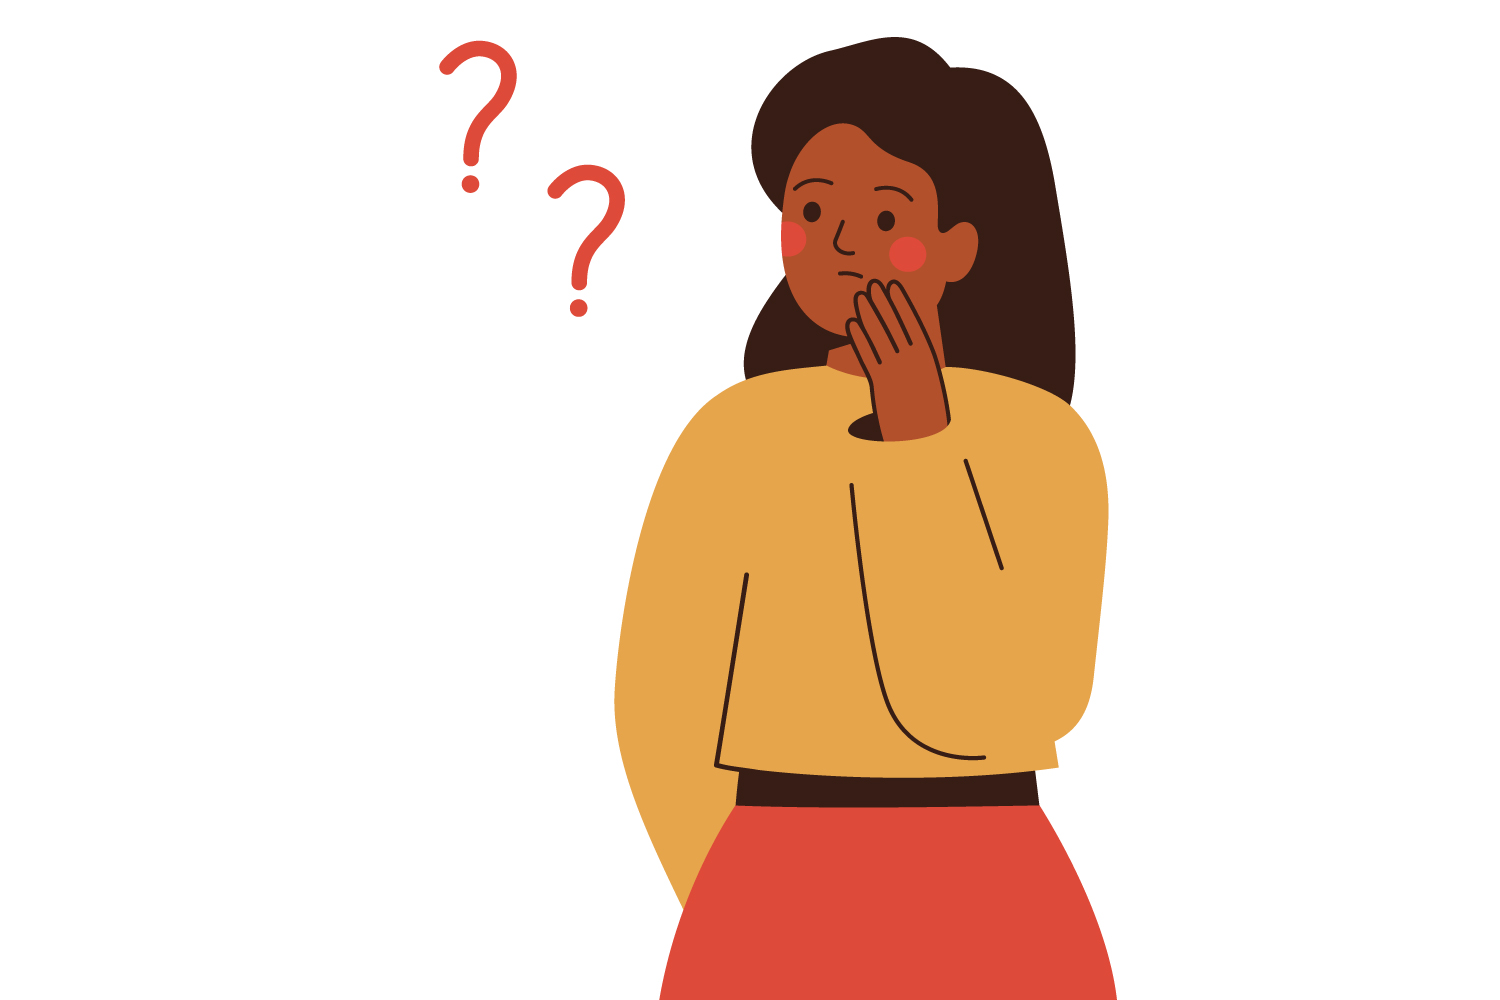 Illustration of a Black woman in a yellow blouse touching her cheek and wondering next to red question marks whether she has sleep apnea